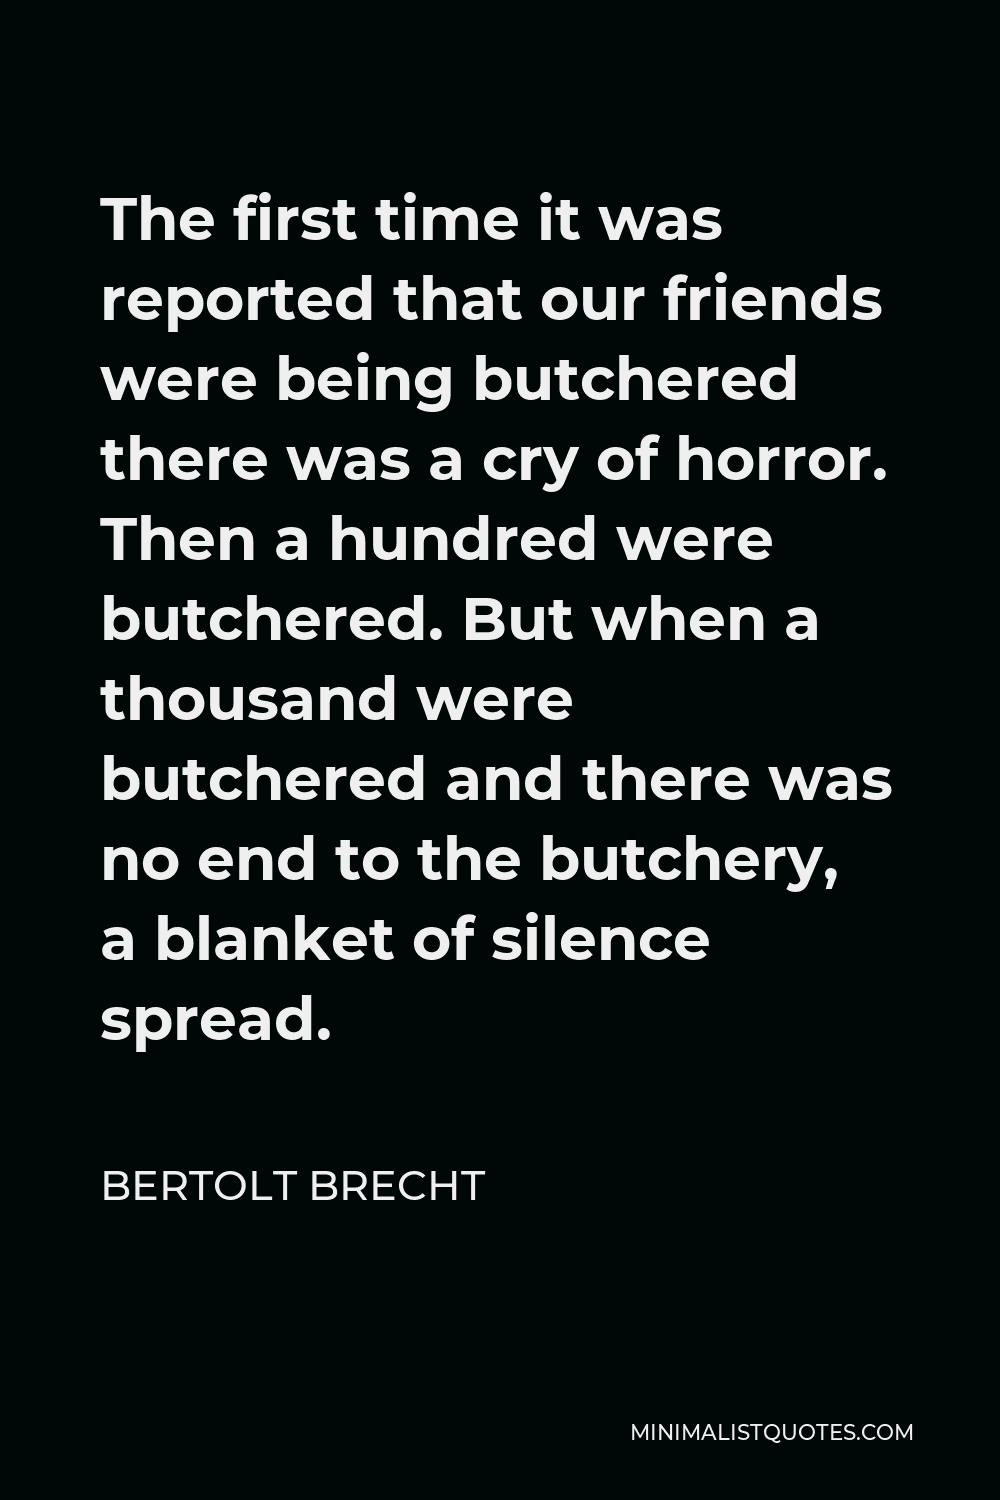 Bertolt Brecht Quote - The first time it was reported that our friends were being butchered there was a cry of horror. Then a hundred were butchered. But when a thousand were butchered and there was no end to the butchery, a blanket of silence spread.